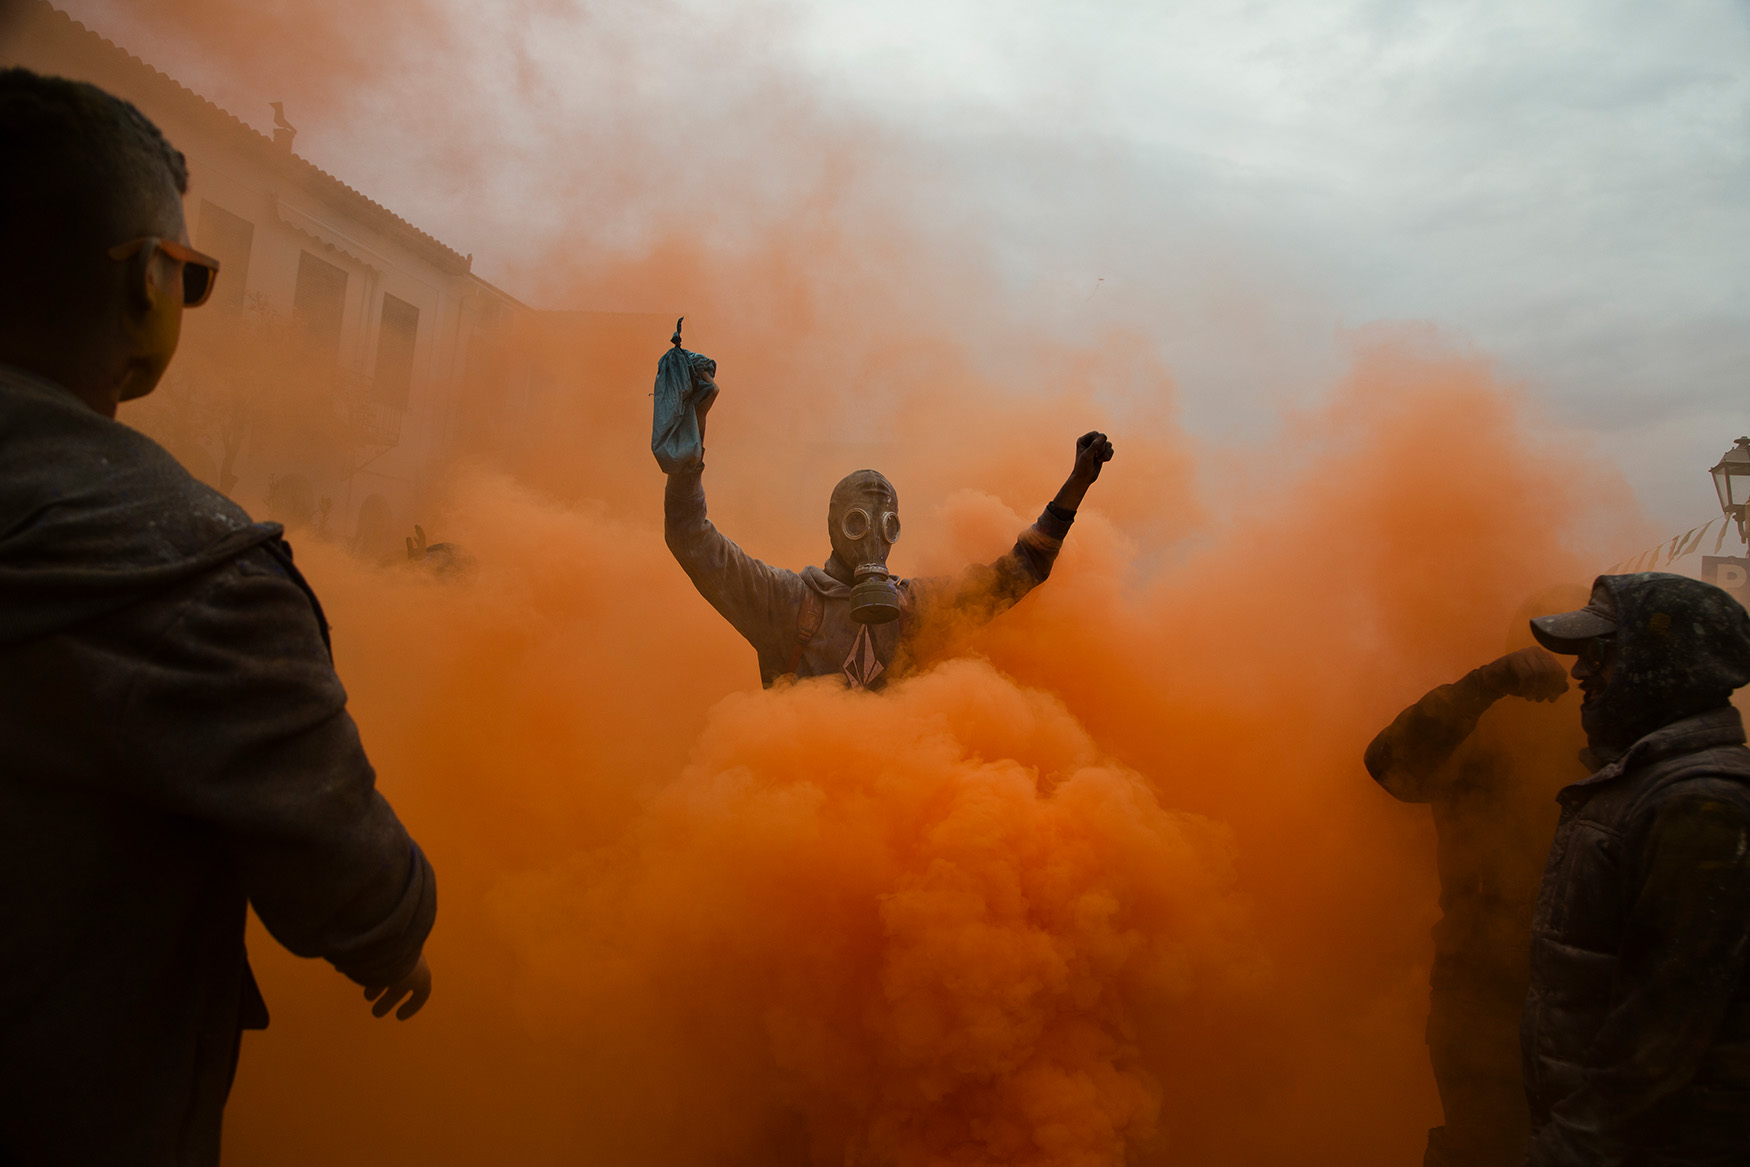  in this Monday, Feb. 19, 2018 photo, revelers take part in the flour war, a unique colorful flour fight marking the end of the carnival season in the port town of Galaxidi, some 200 kilometers (120 miles) west of Athens.  (AP Photo/Petros Giannakour